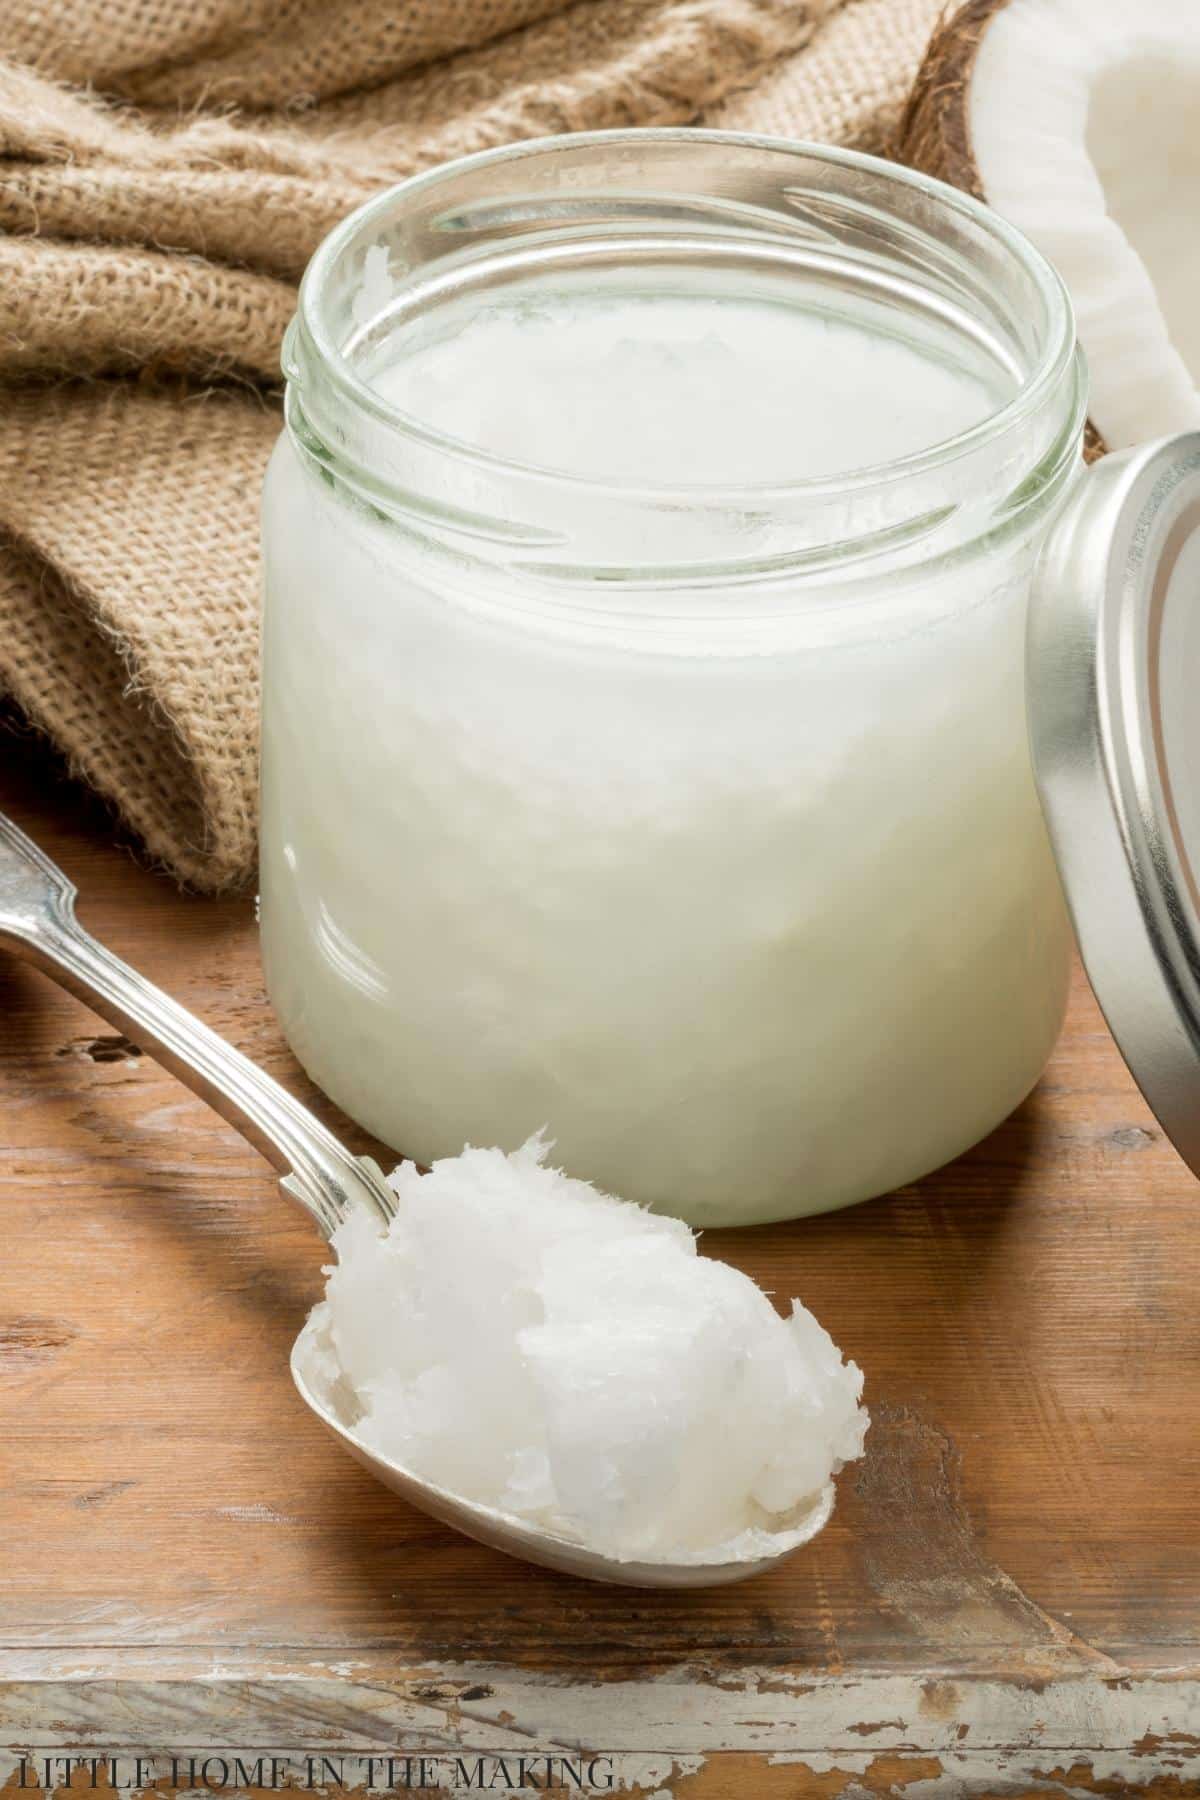 A jar of coconut oil, with a spoon of coconut oil resting on the table.